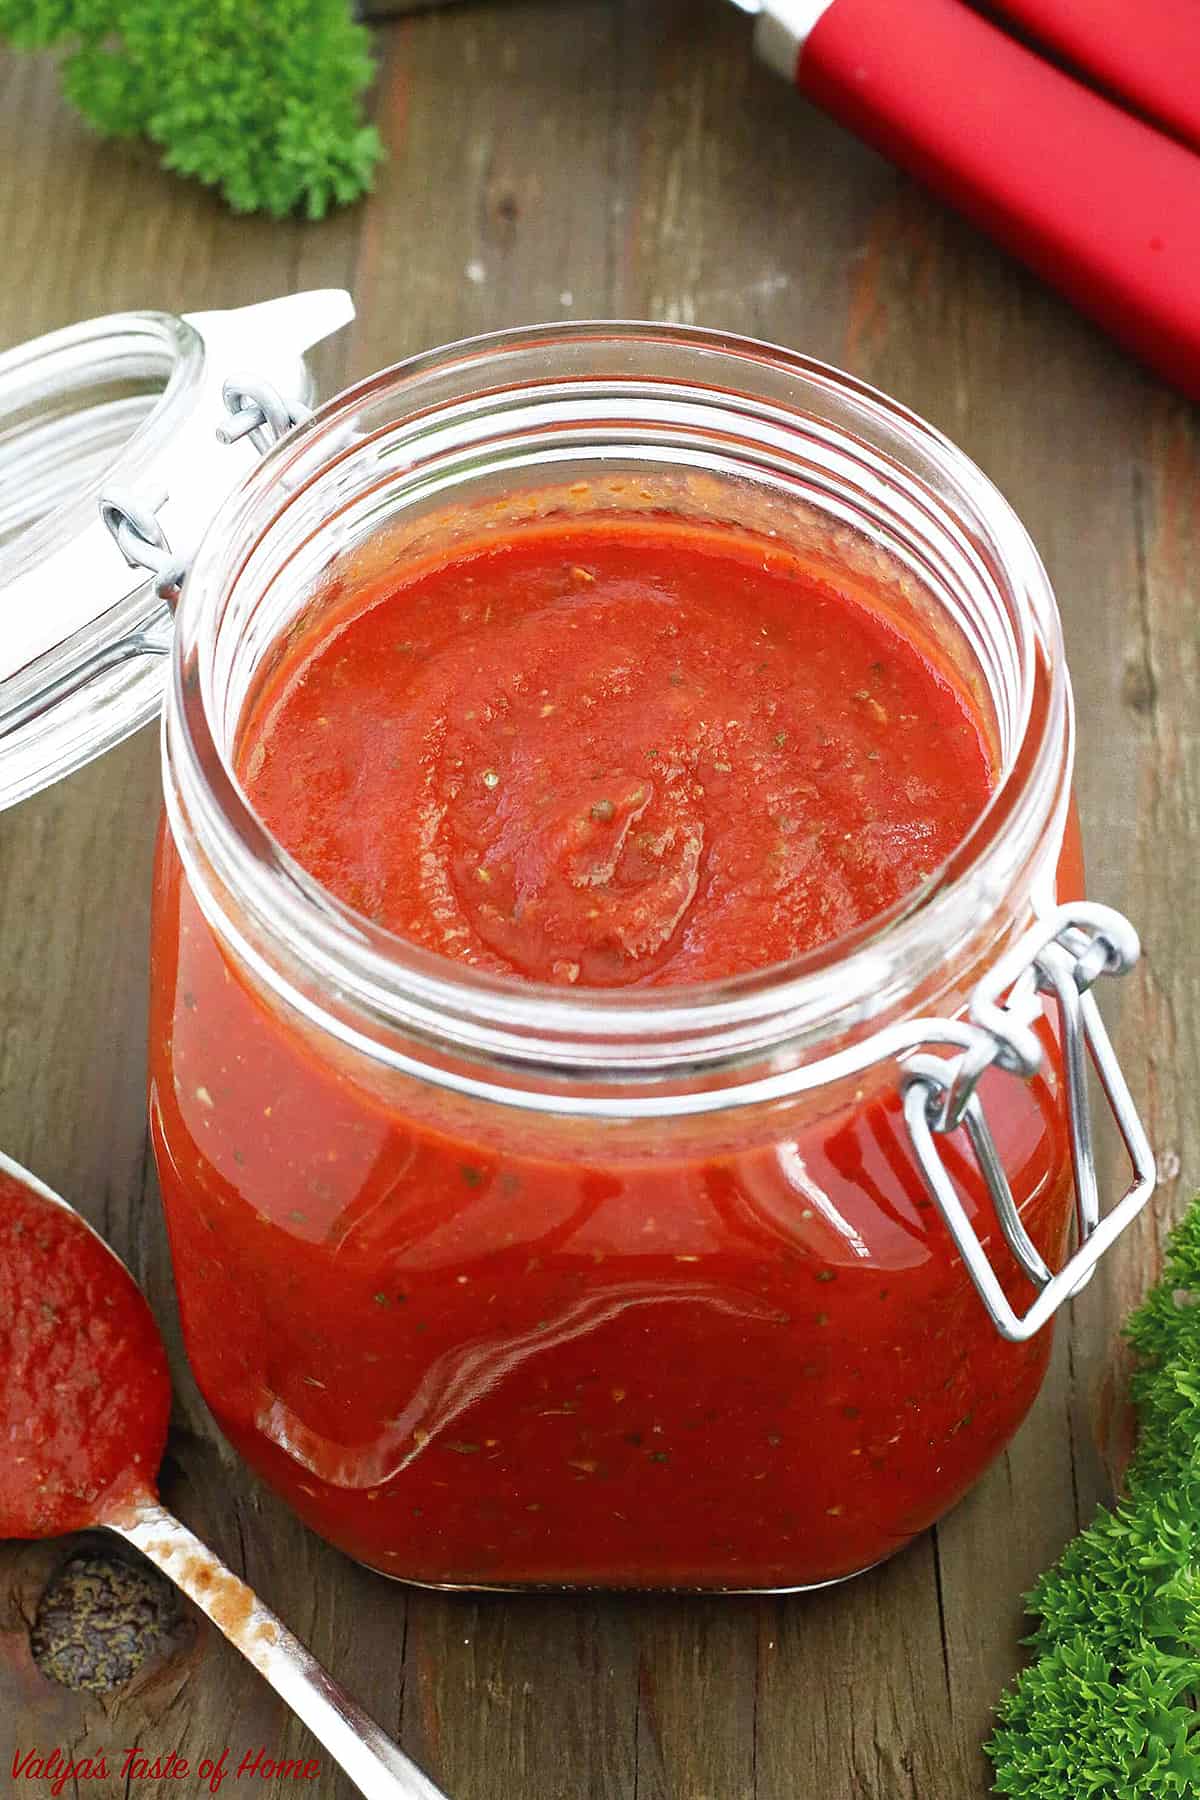 Making pizza sauce is super easy. I’m so glad to have one less product to reach for on grocery store shelves.